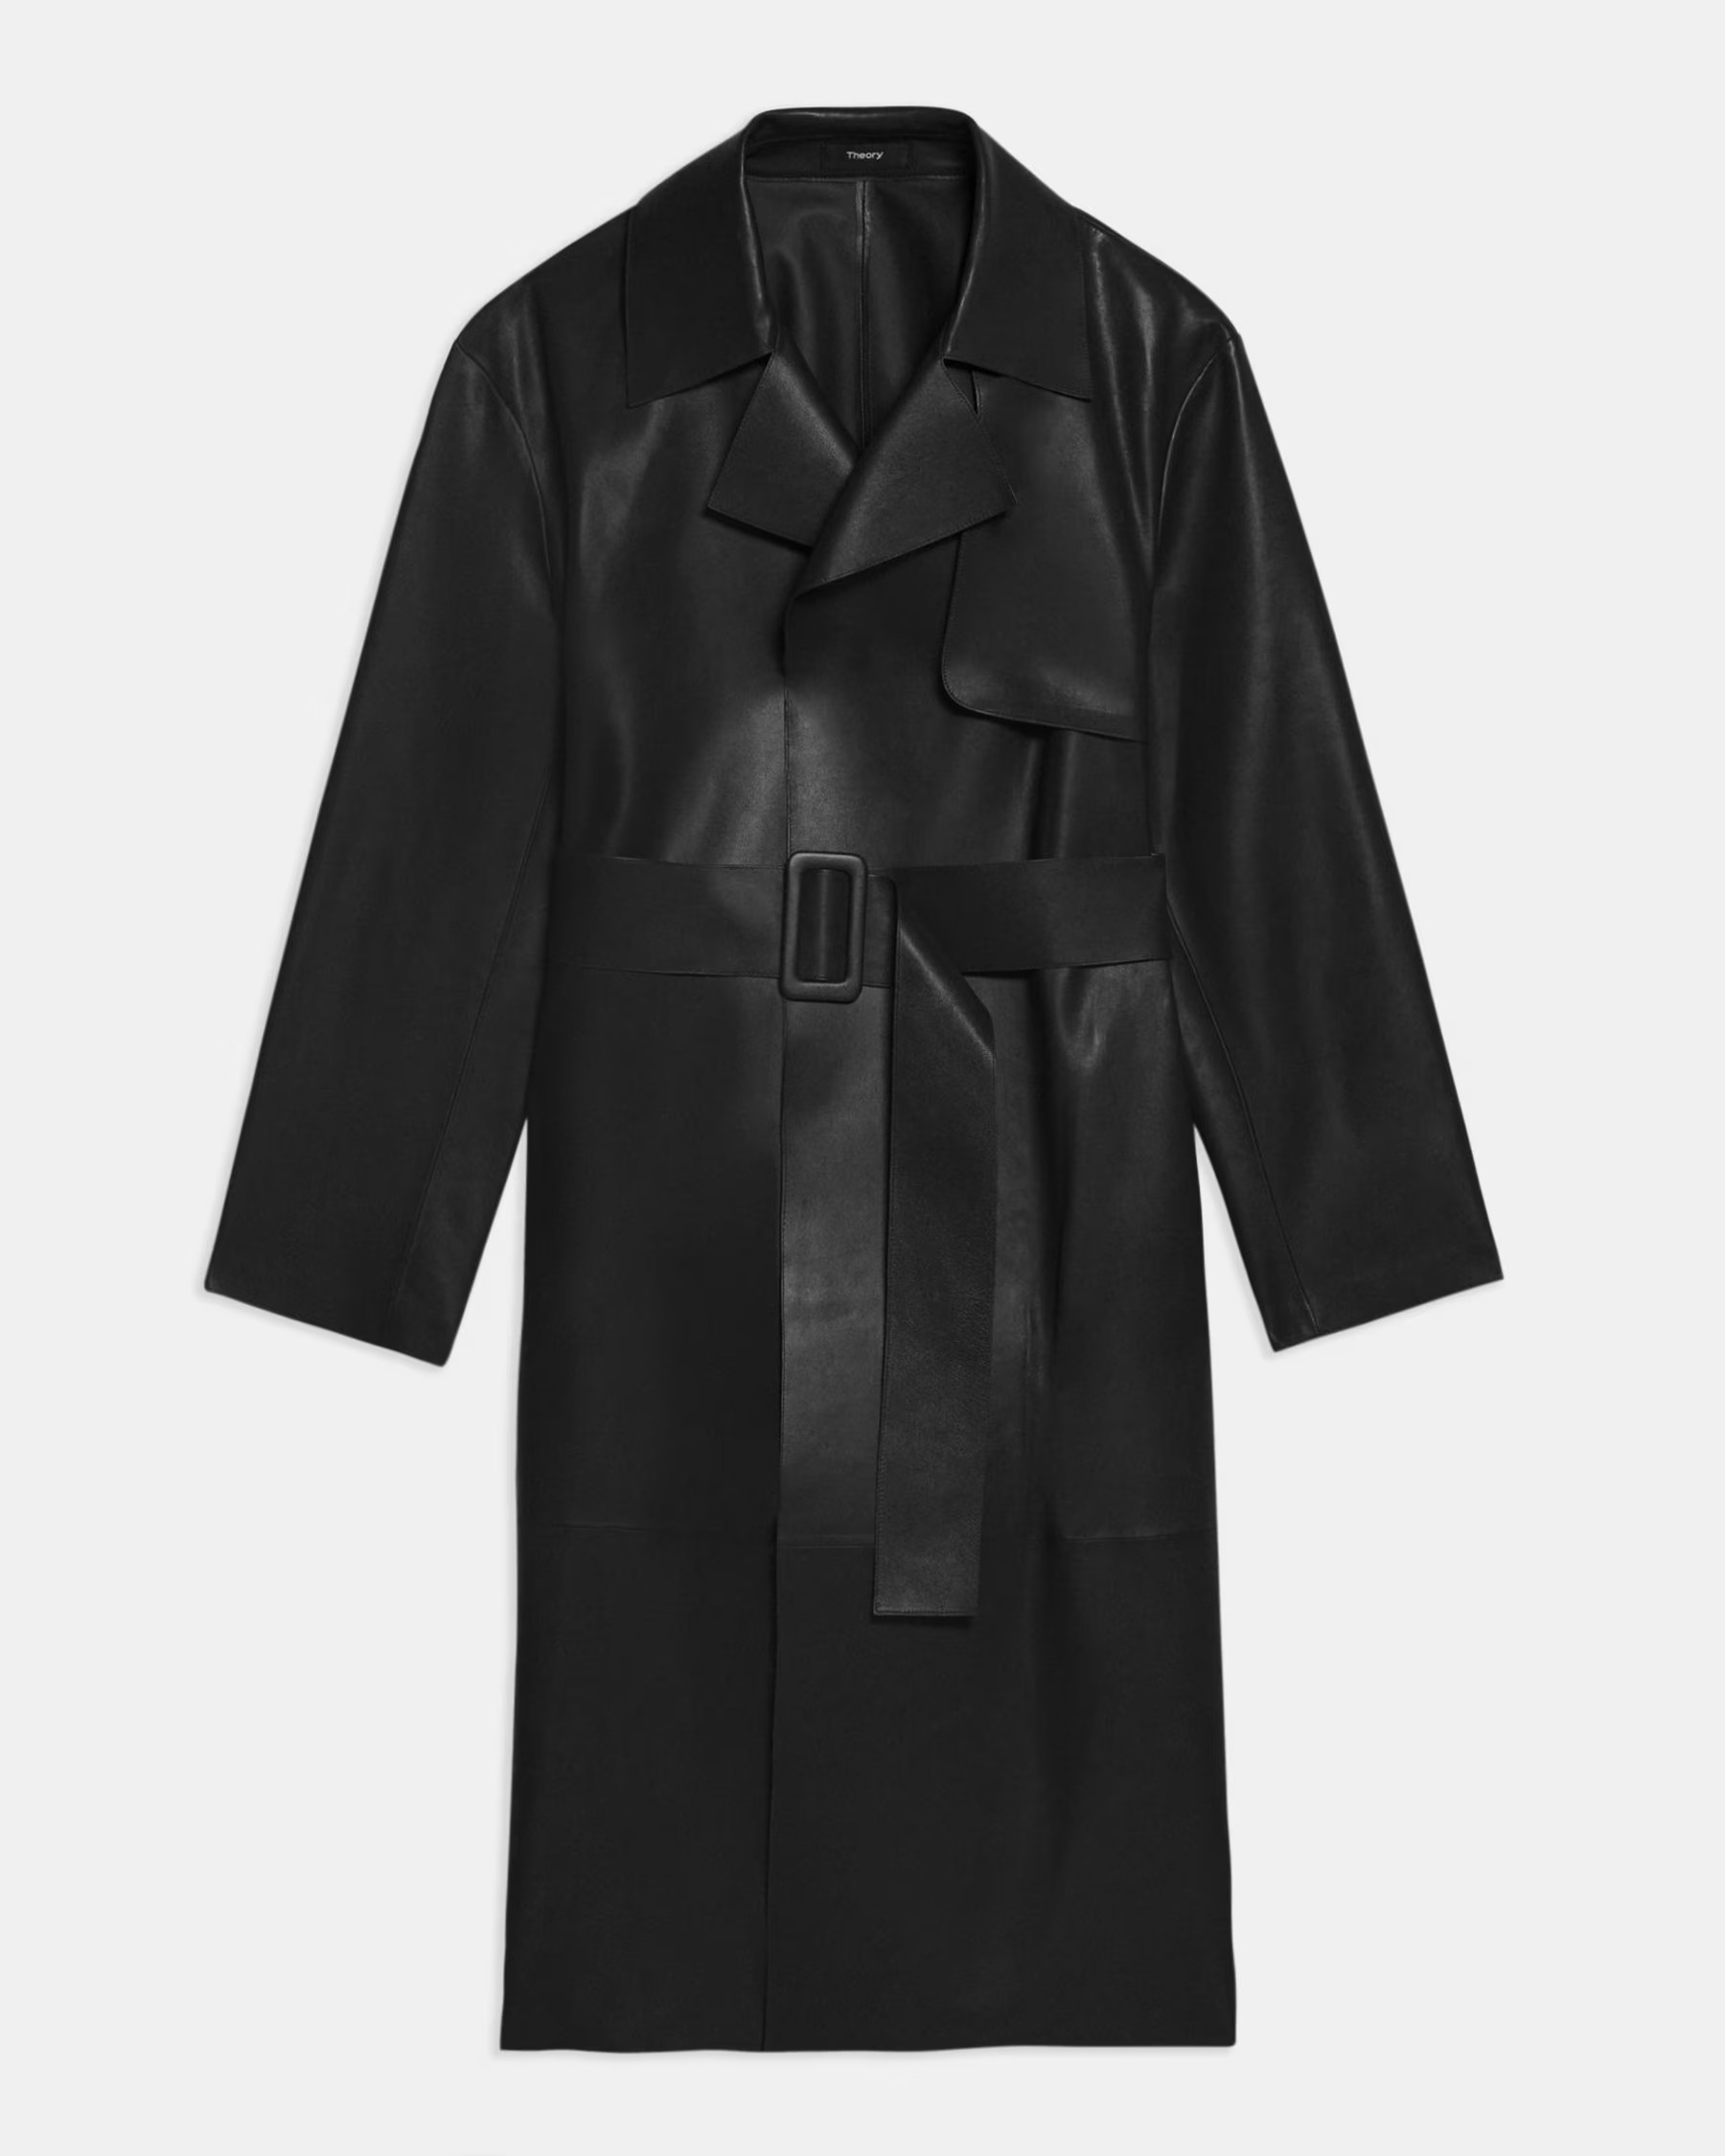 Alexa Chung Just Wore a Black Leather Trench Coat | Who What Wear